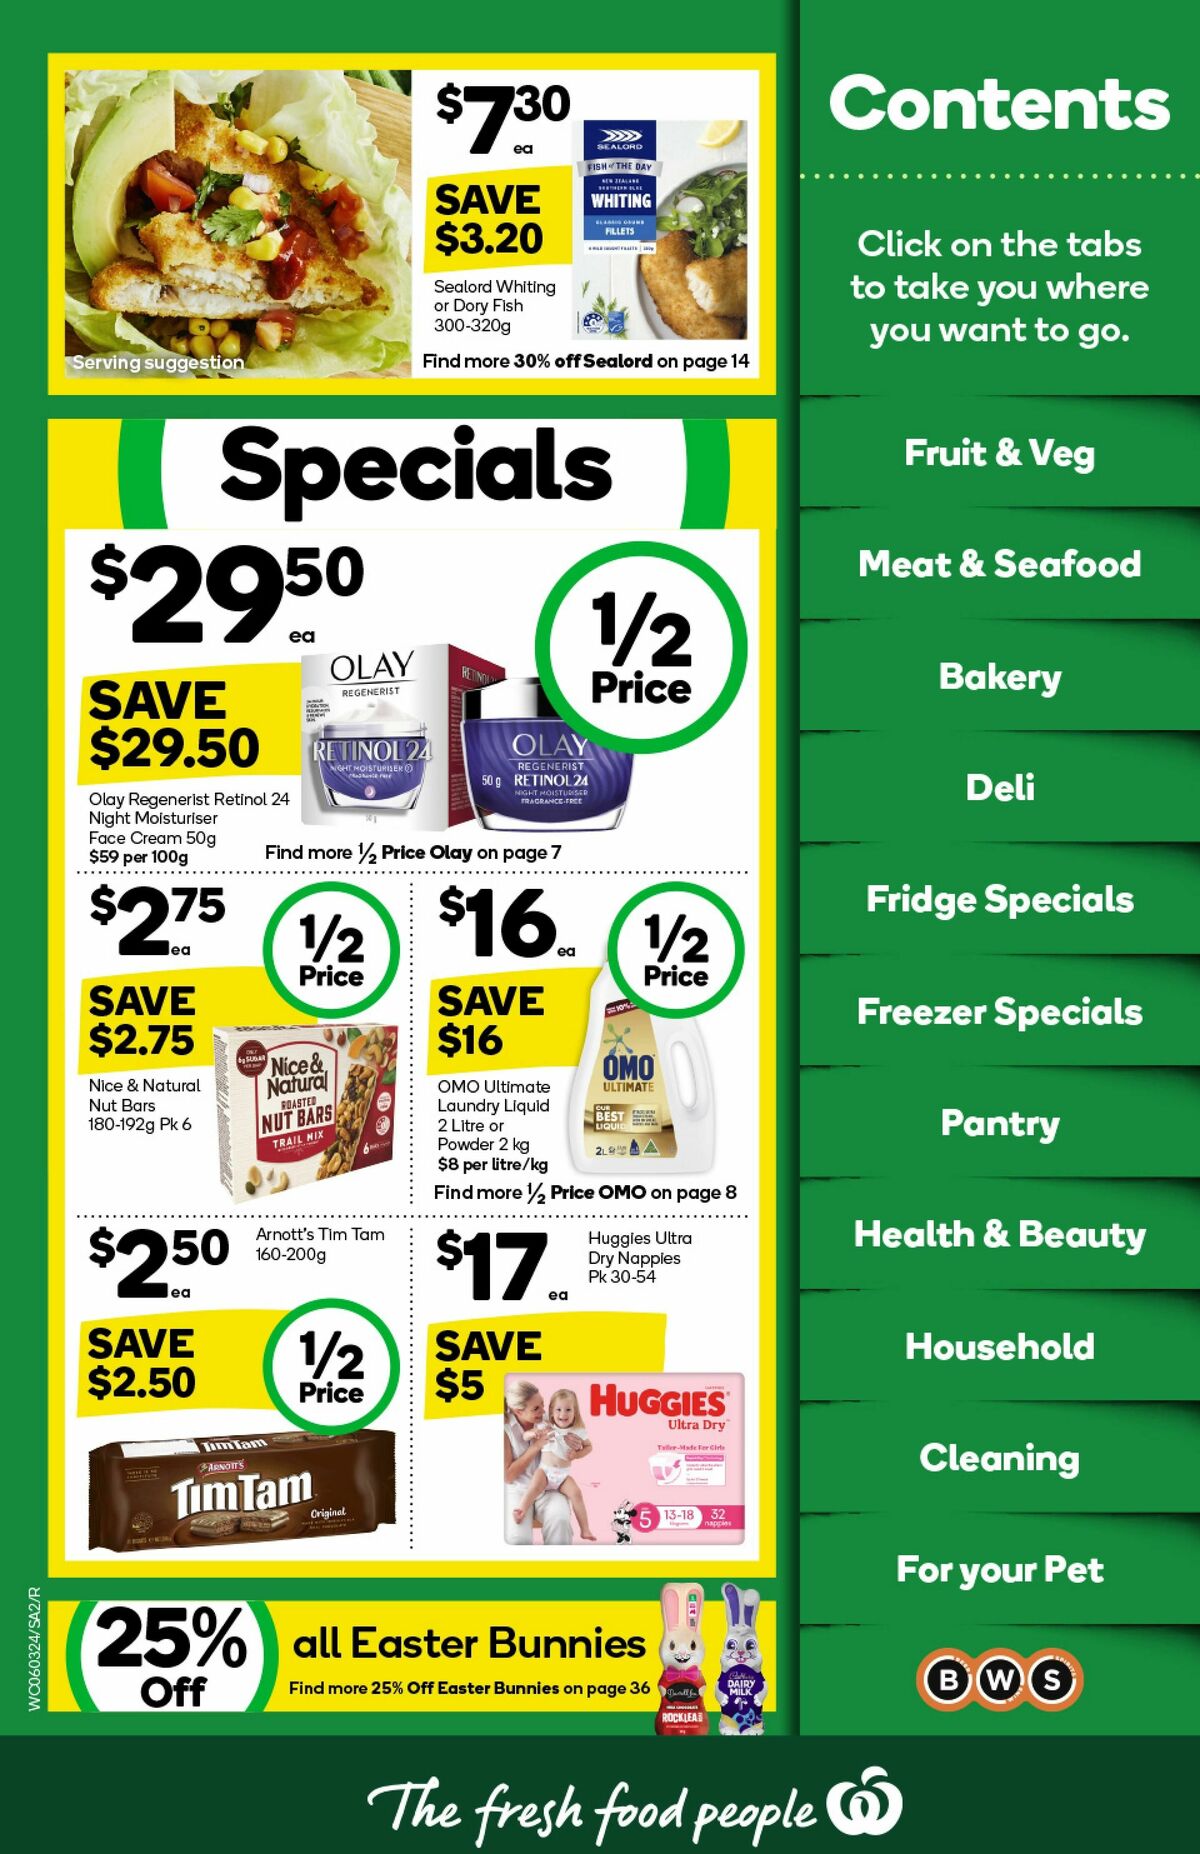 Woolworths Catalogues from 6 March